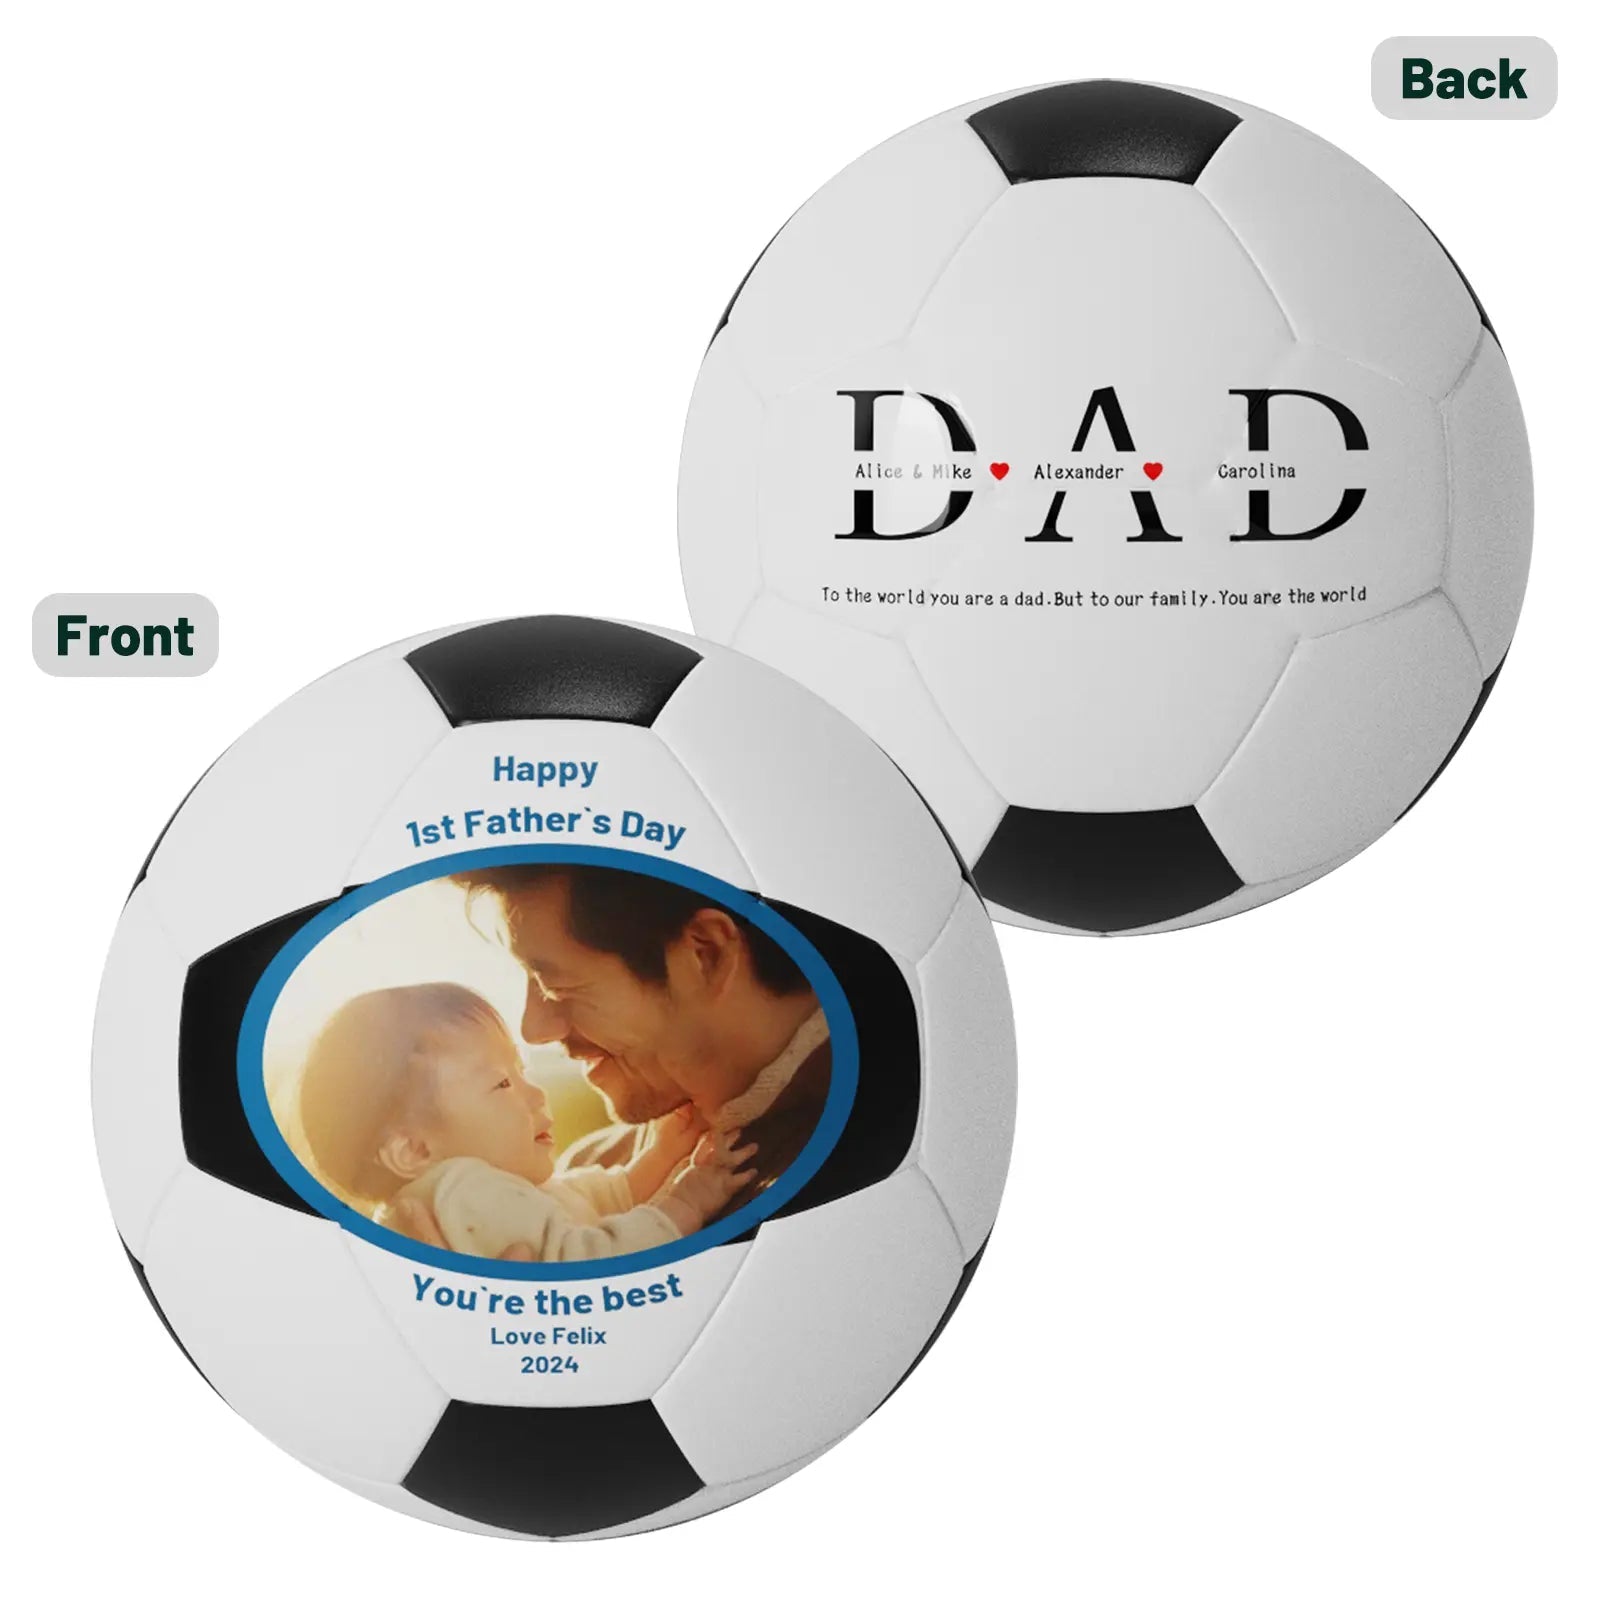 Father's Day Photo Personalized Soccer Ball - Family Watchs